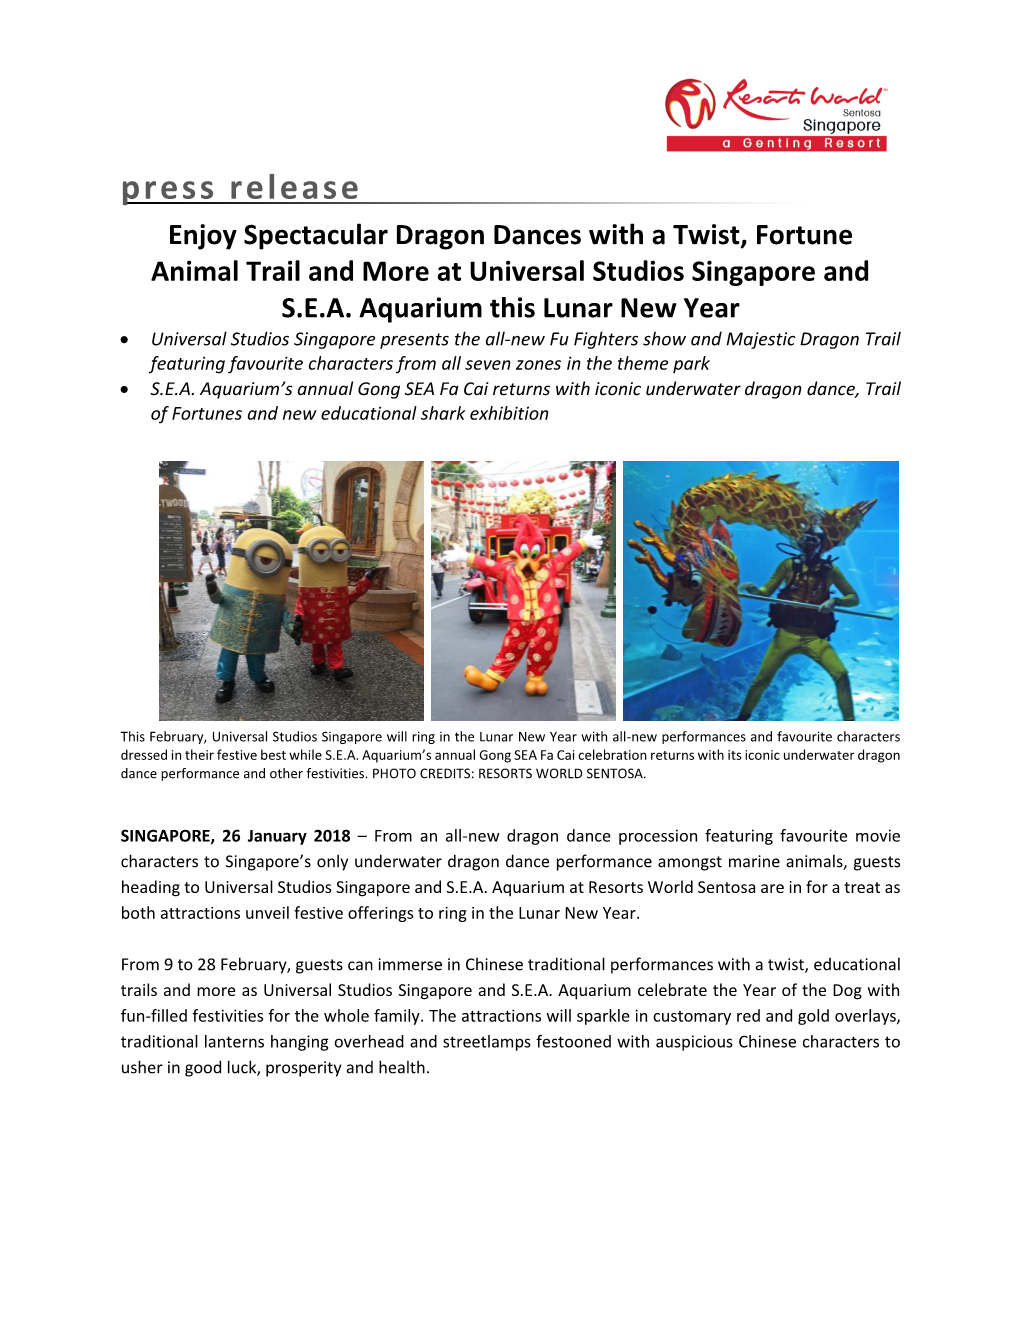 Press Release Enjoy Spectacular Dragon Dances with a Twist, Fortune Animal Trail and More at Universal Studios Singapore and S.E.A